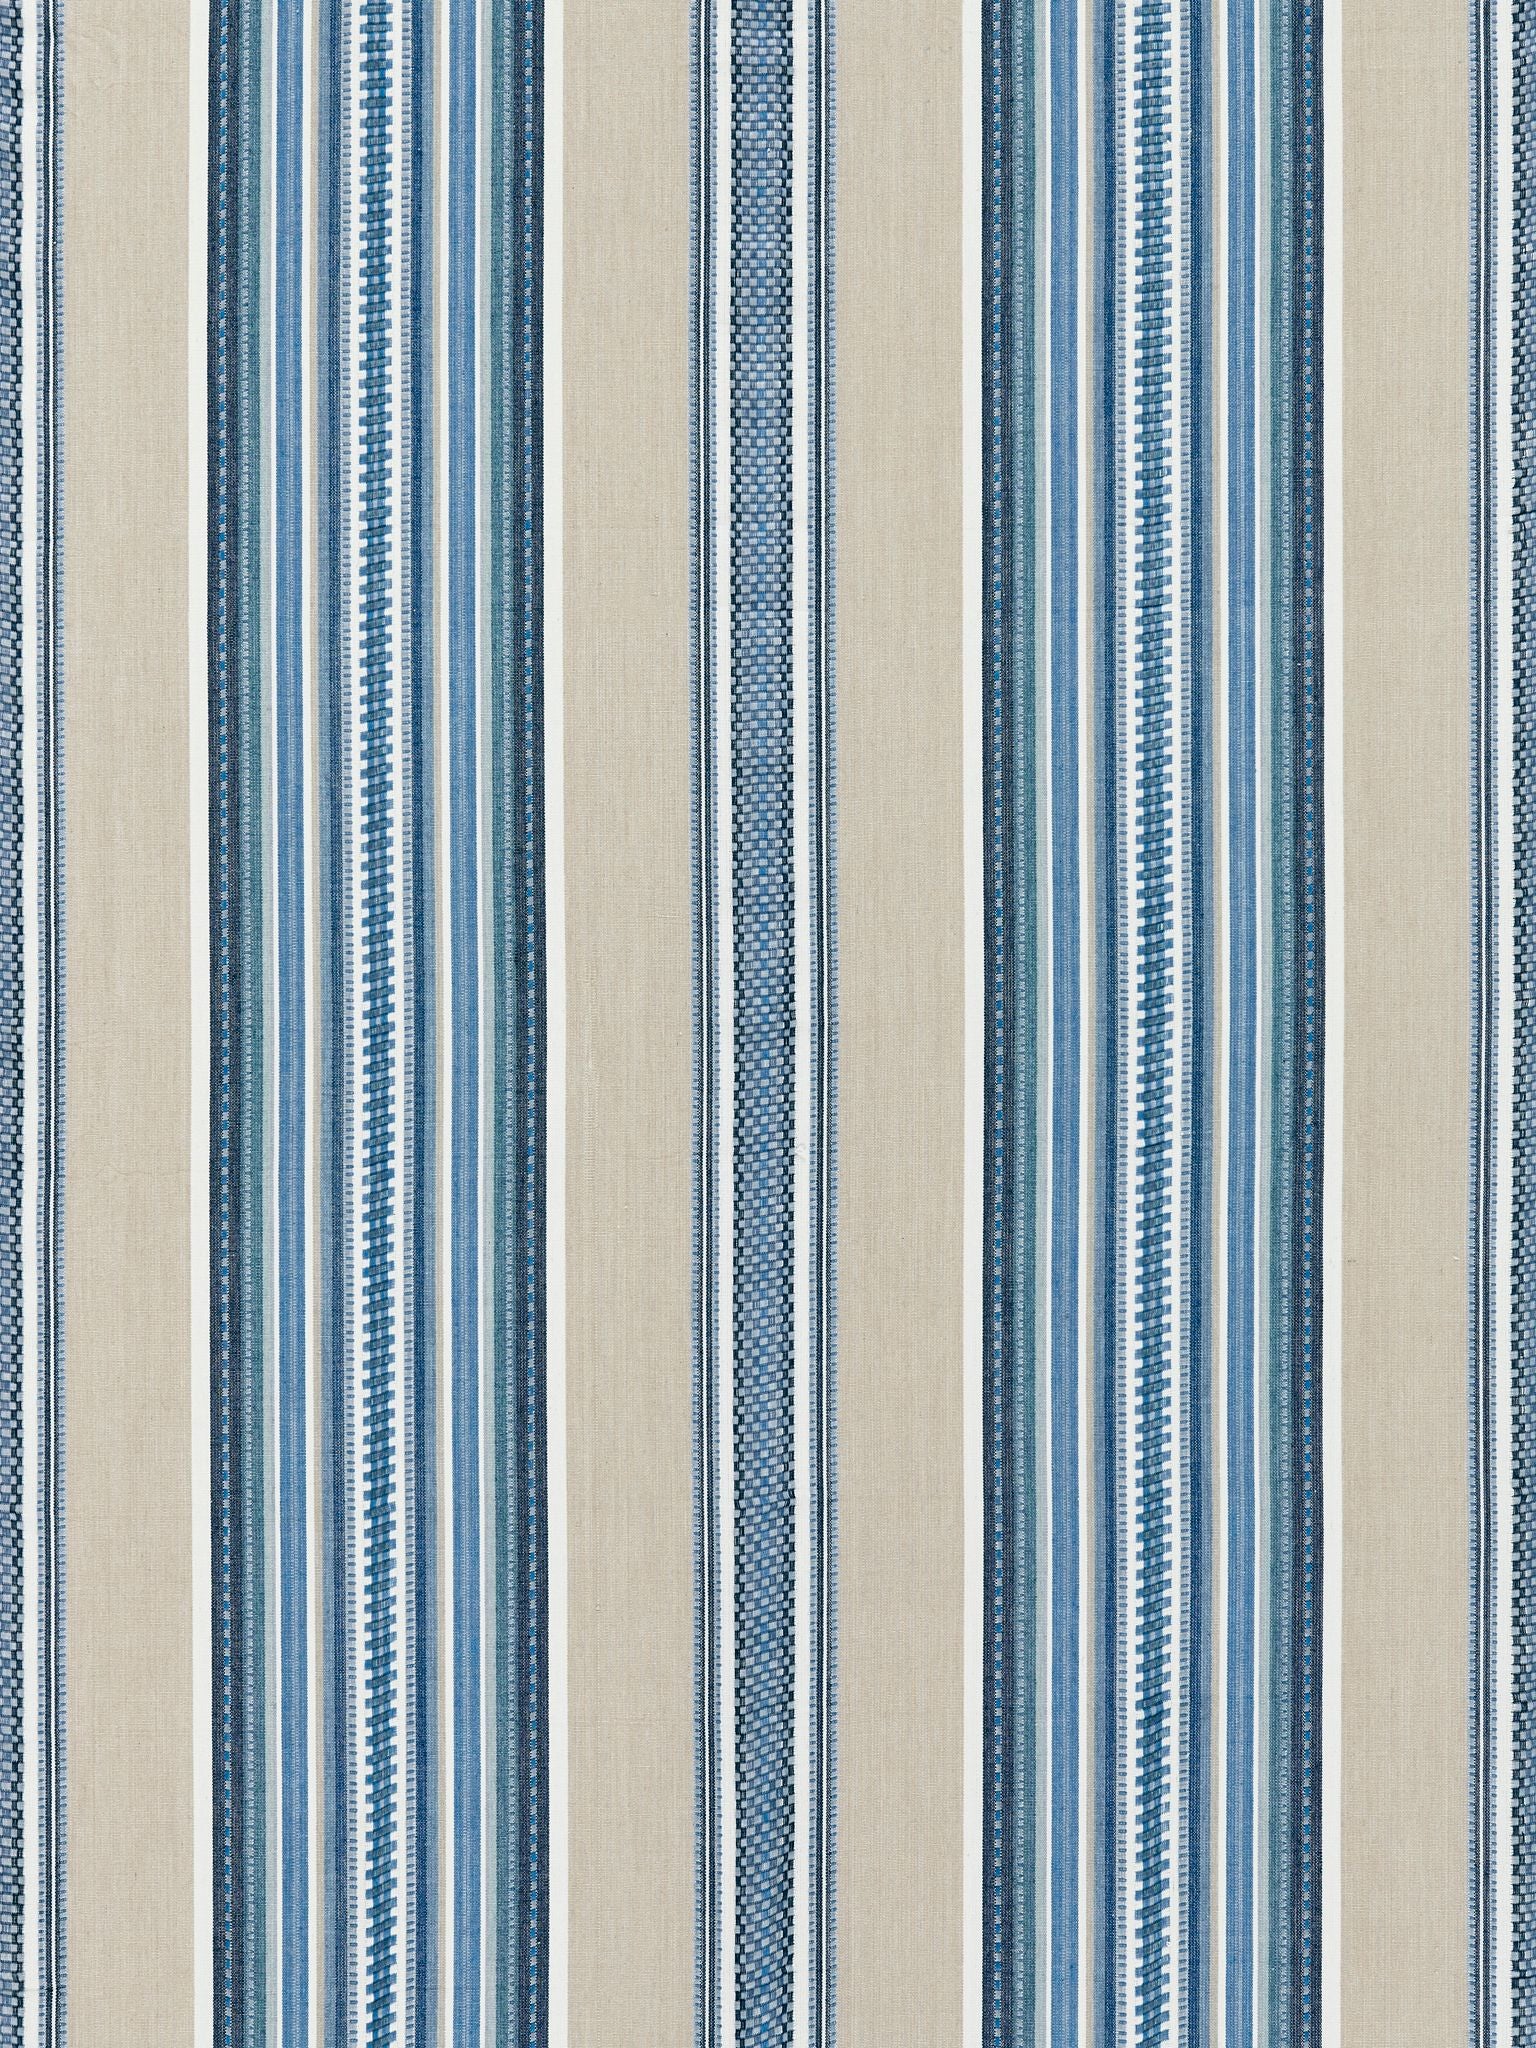 Cyrus Cotton Stripe fabric in chambray color - pattern number SC 000227180 - by Scalamandre in the Scalamandre Fabrics Book 1 collection